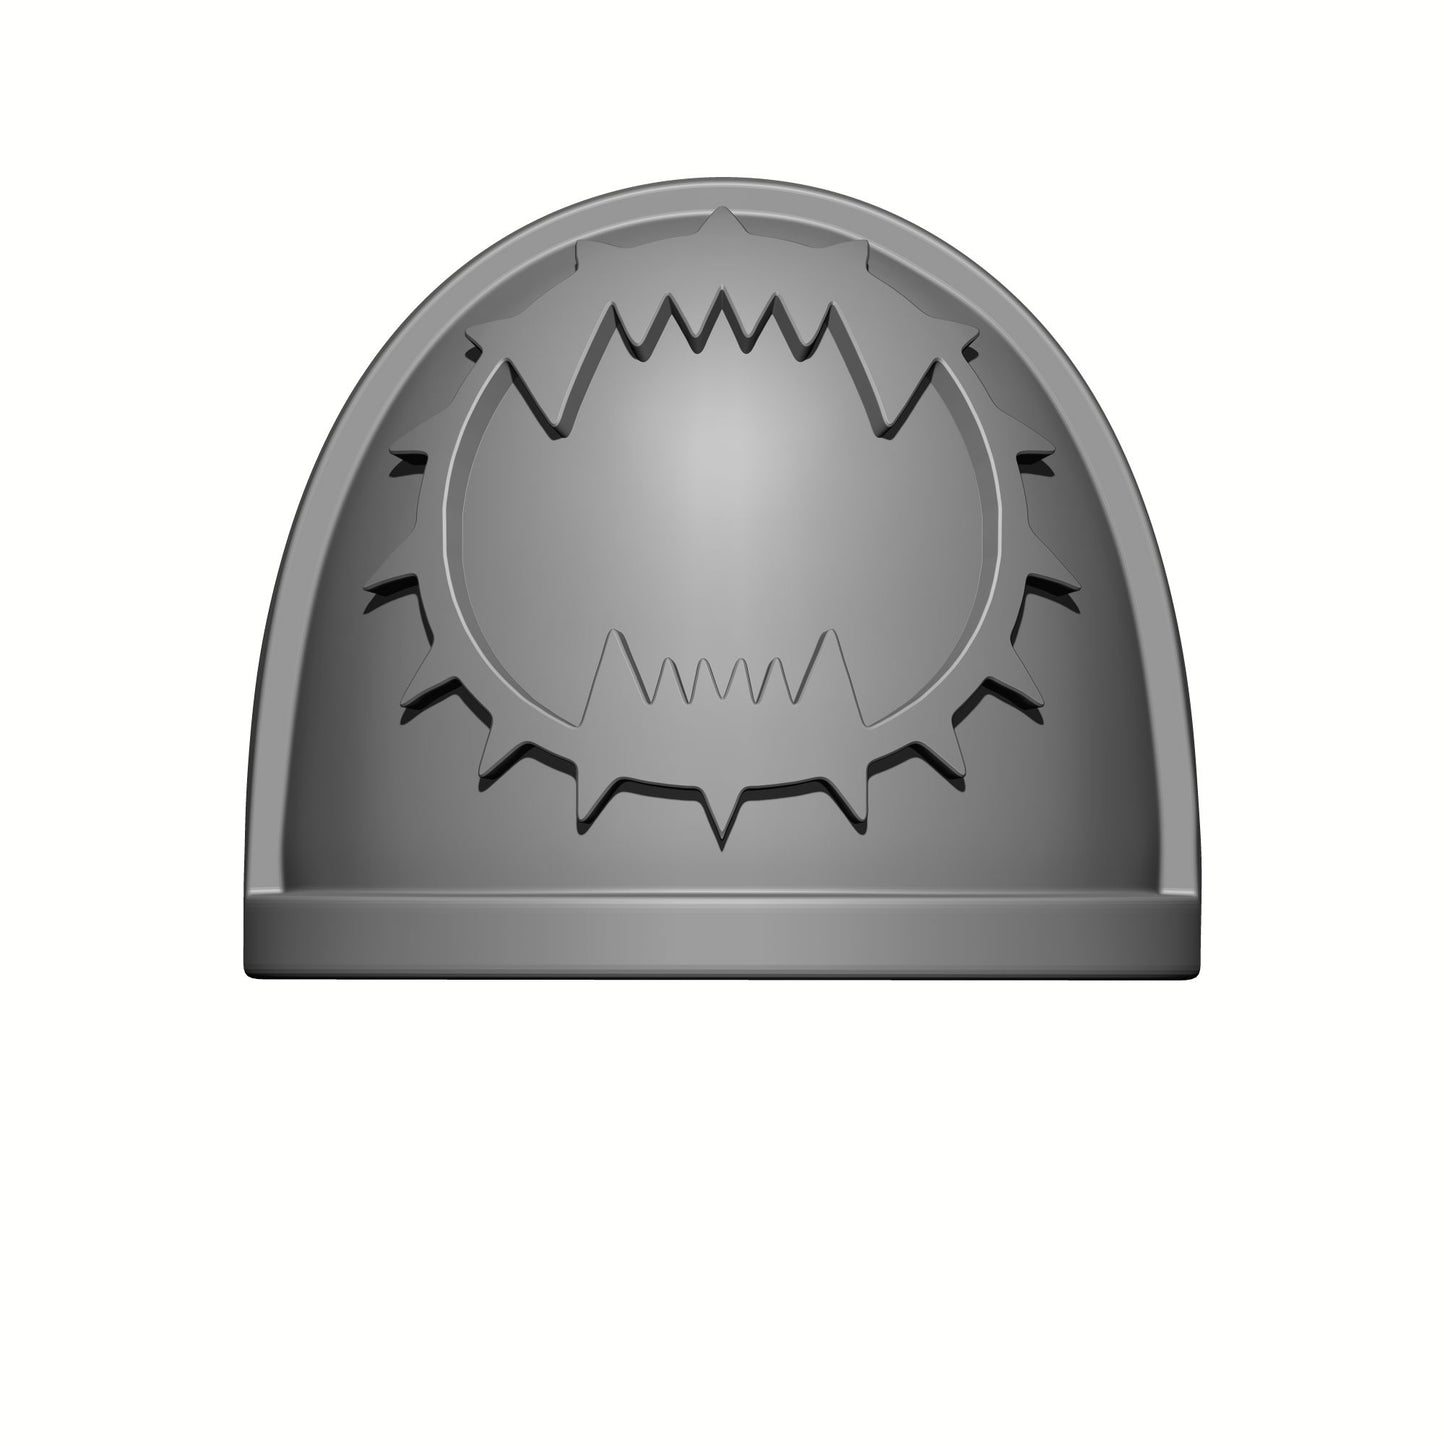 World Eaters Chapter MKIV Shoulder Pad Teeth Icon is Compatible with McFarlane Space Marine Action Figures designed by Fantasy World Games